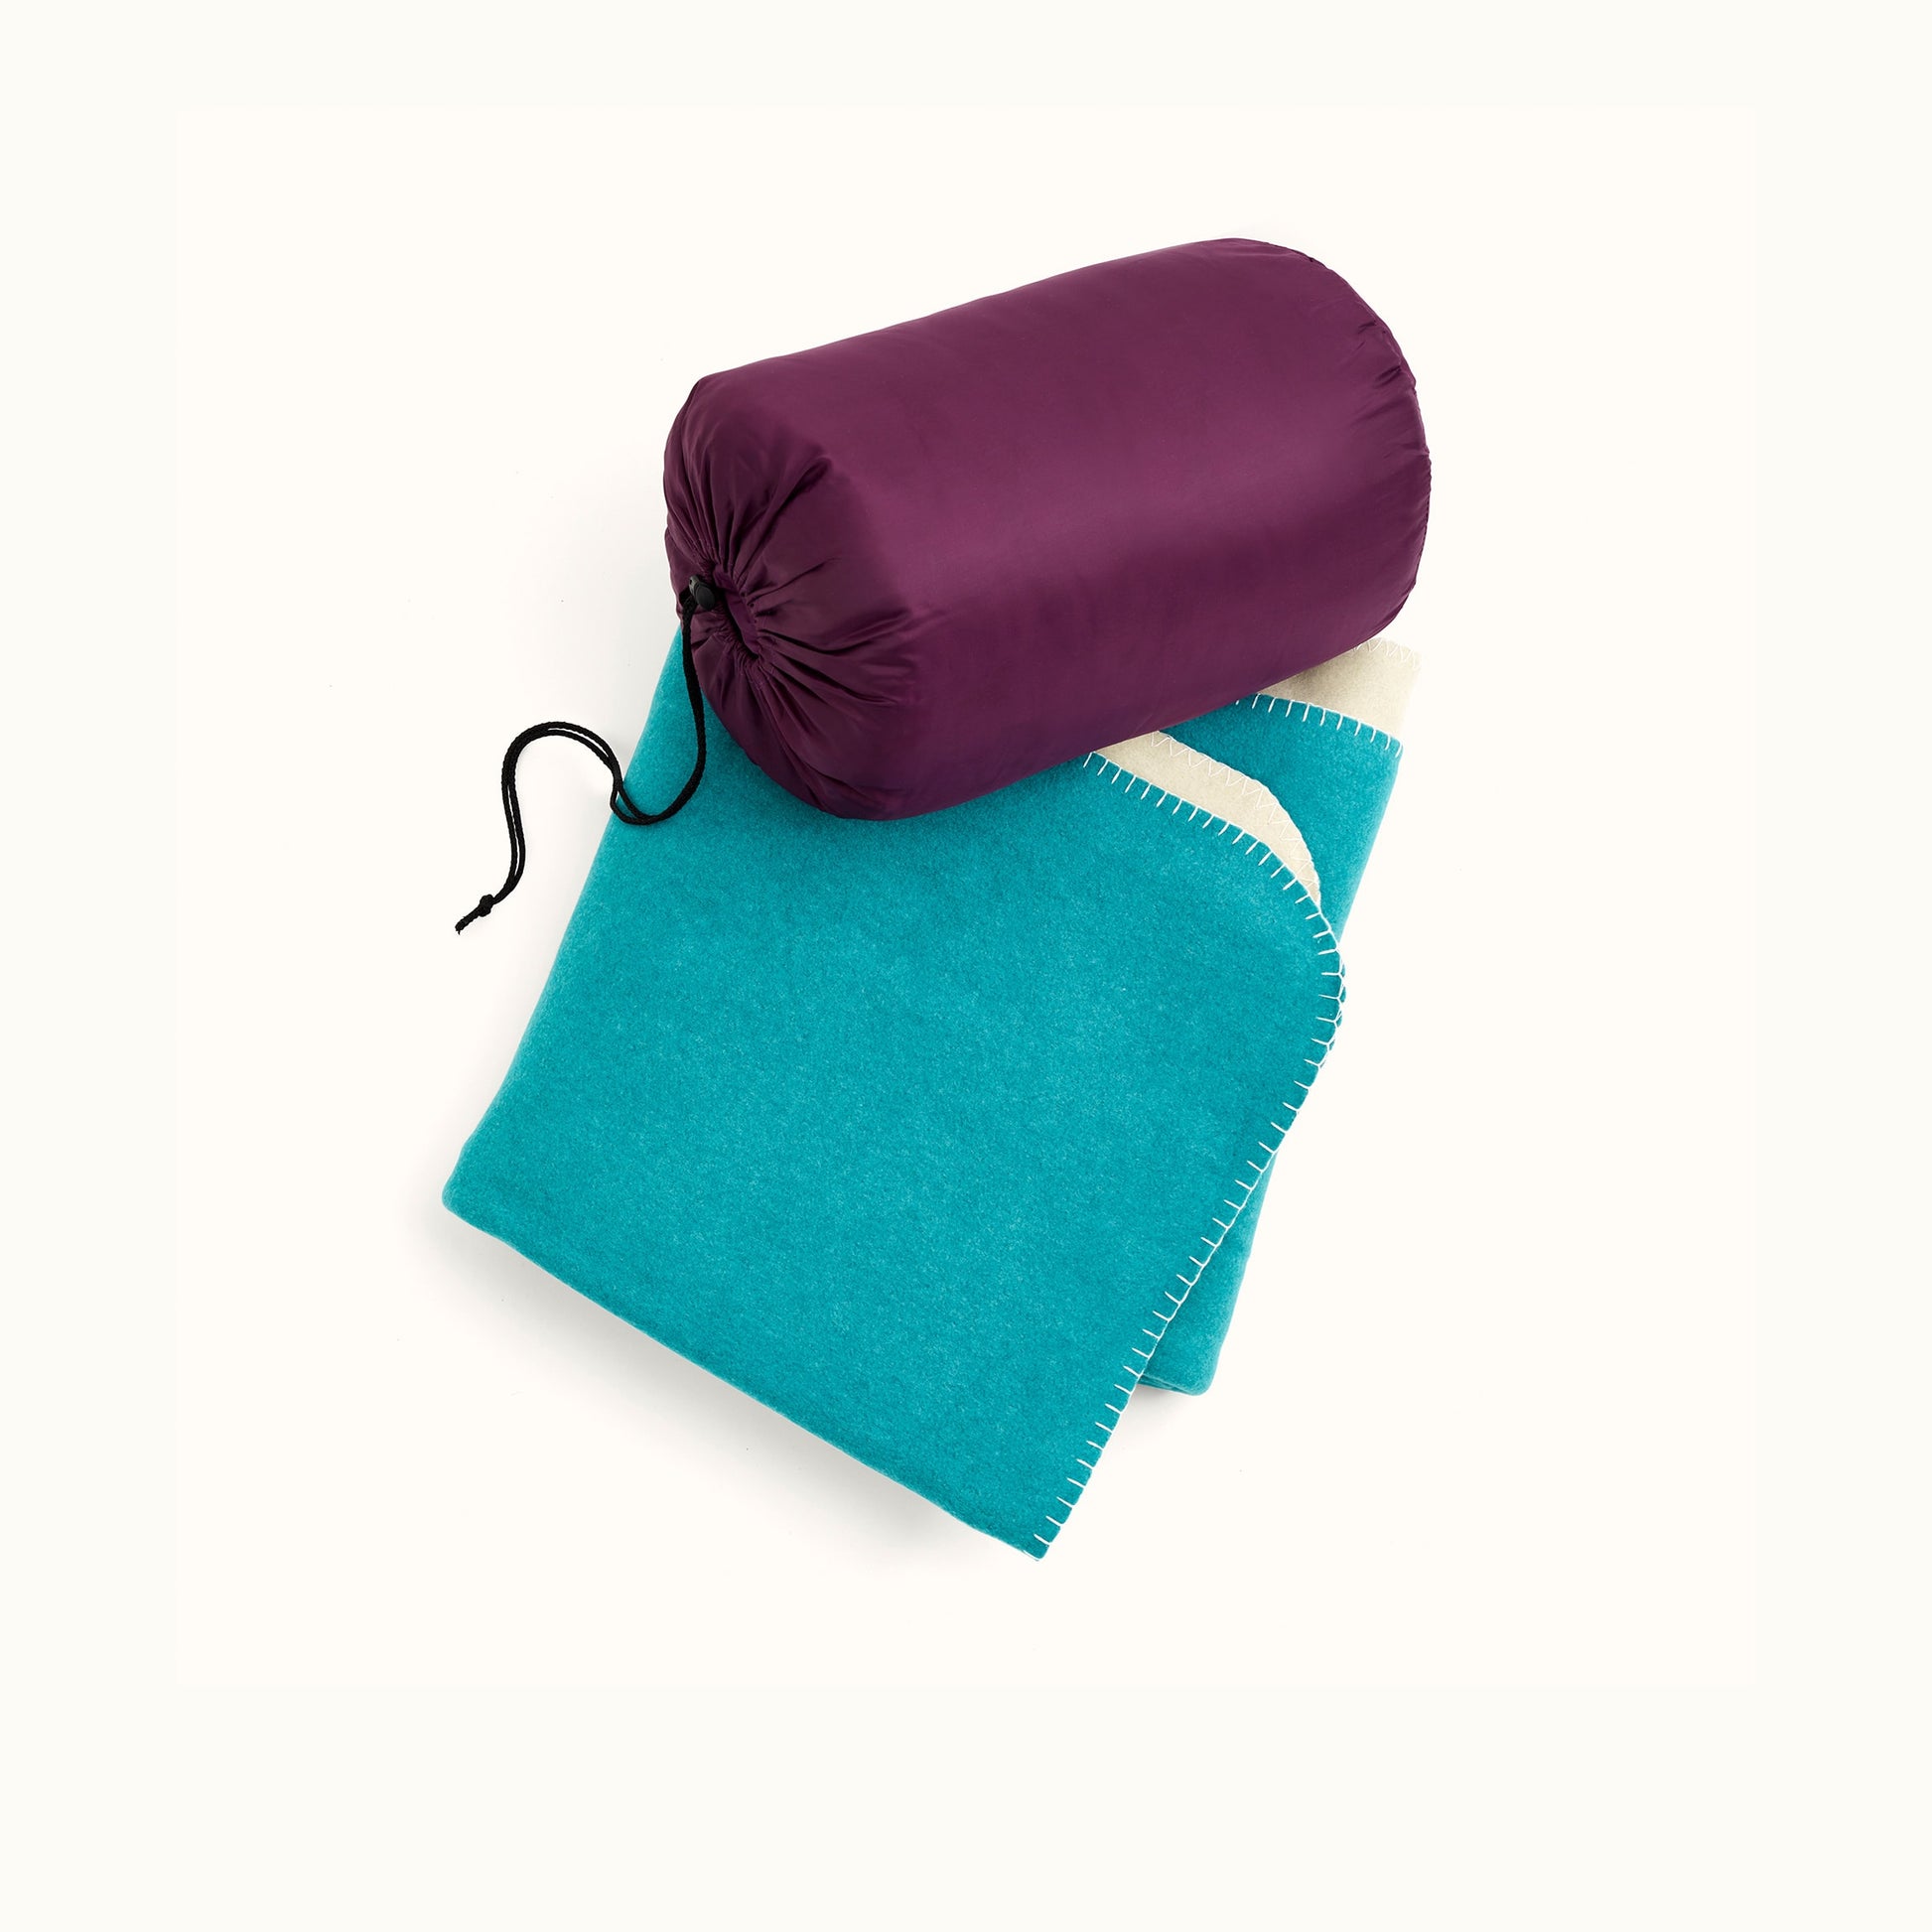 In the image there is a thick light blue blanket folder and placed in the middle on the phtoo, with a thermal sleeping bag in a burgundy sack placed on the top line of the blanket.